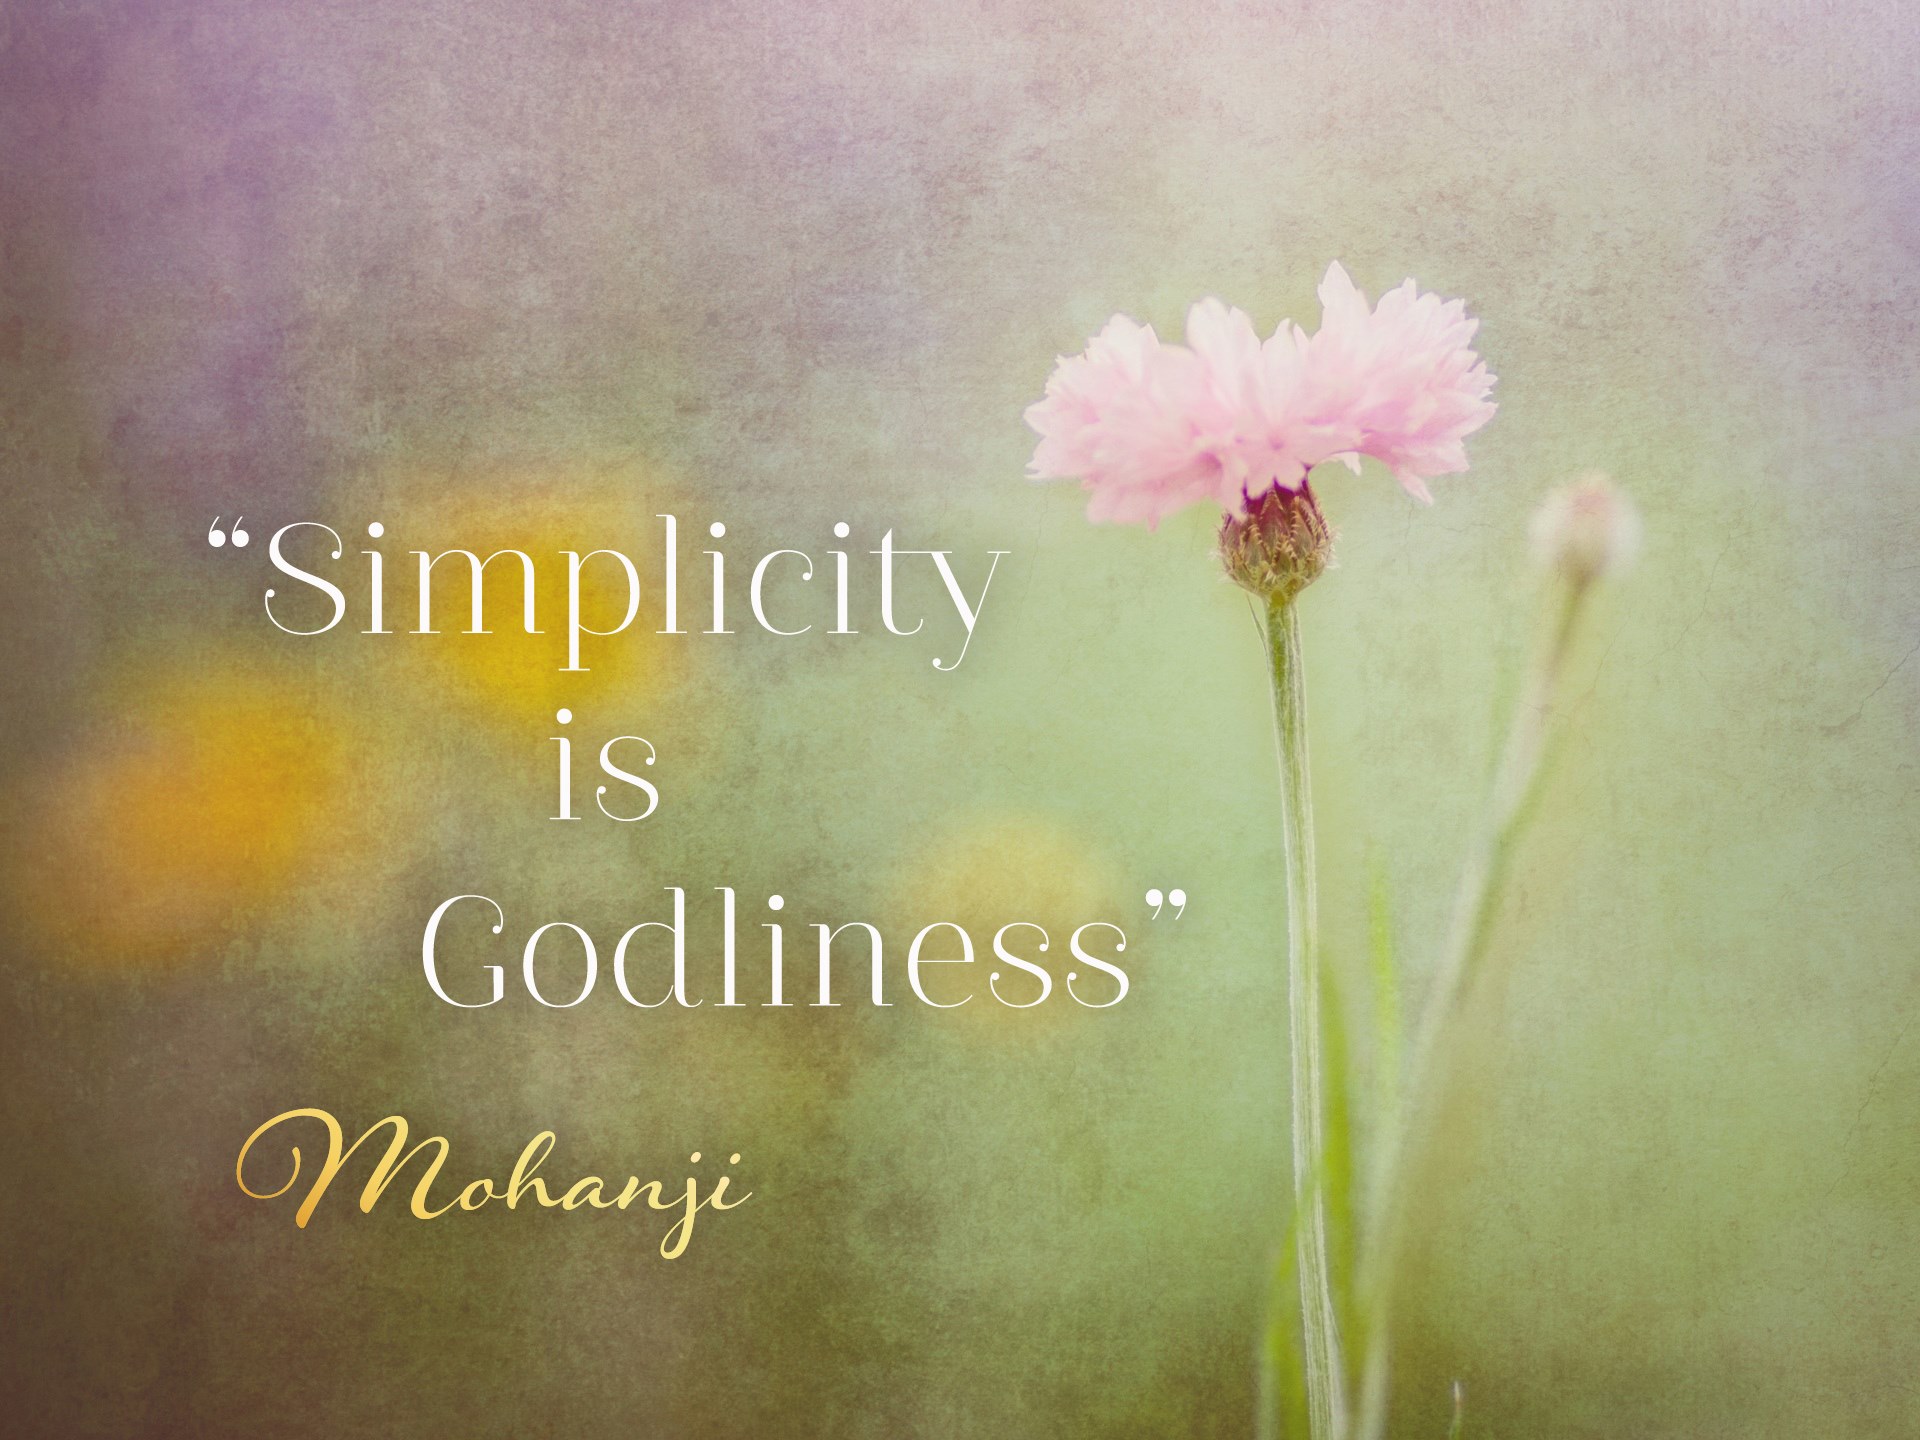 5 mohanji-quote-simplicity-is-godliness